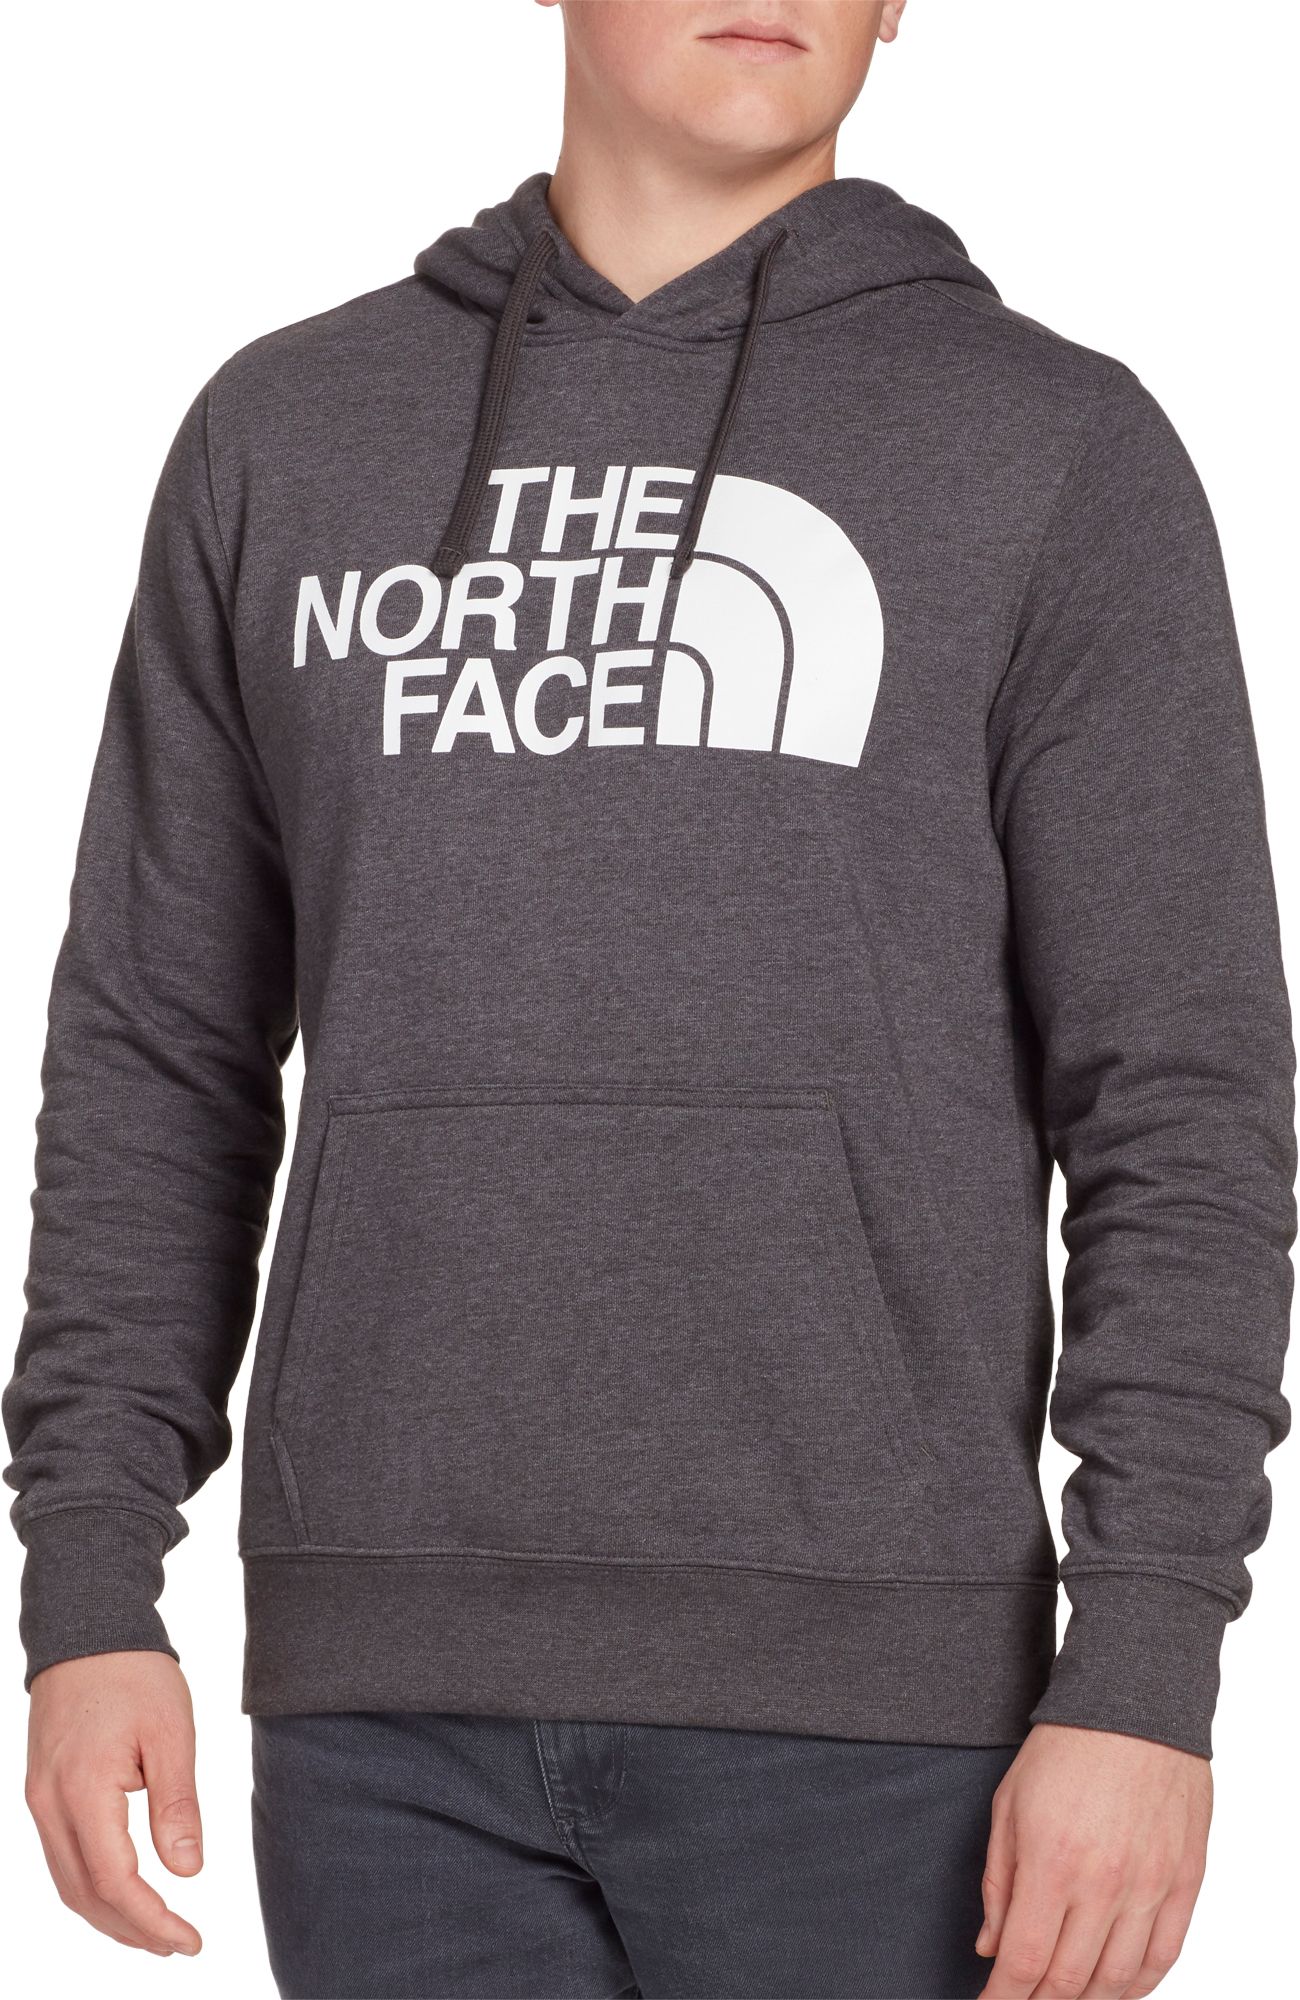 The North Face Men's Half Dome Hoodie - .00